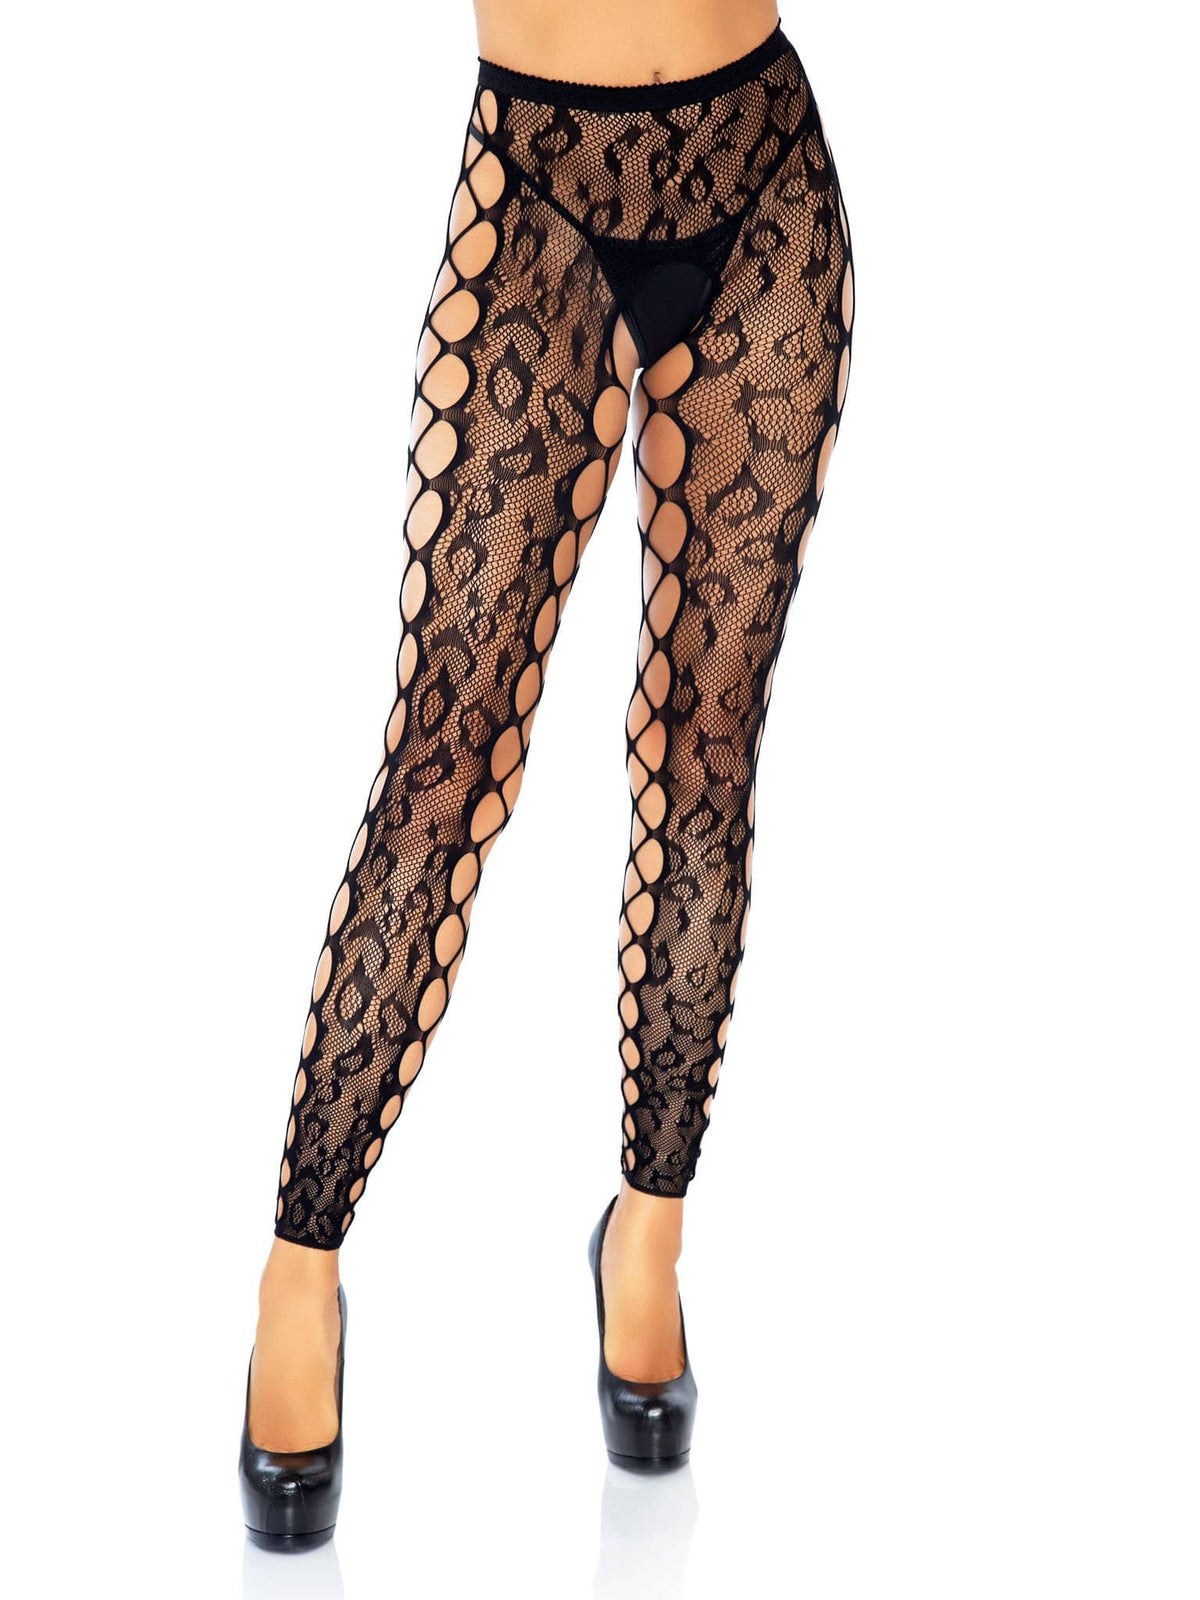 footless leopard lace crotchless tights black